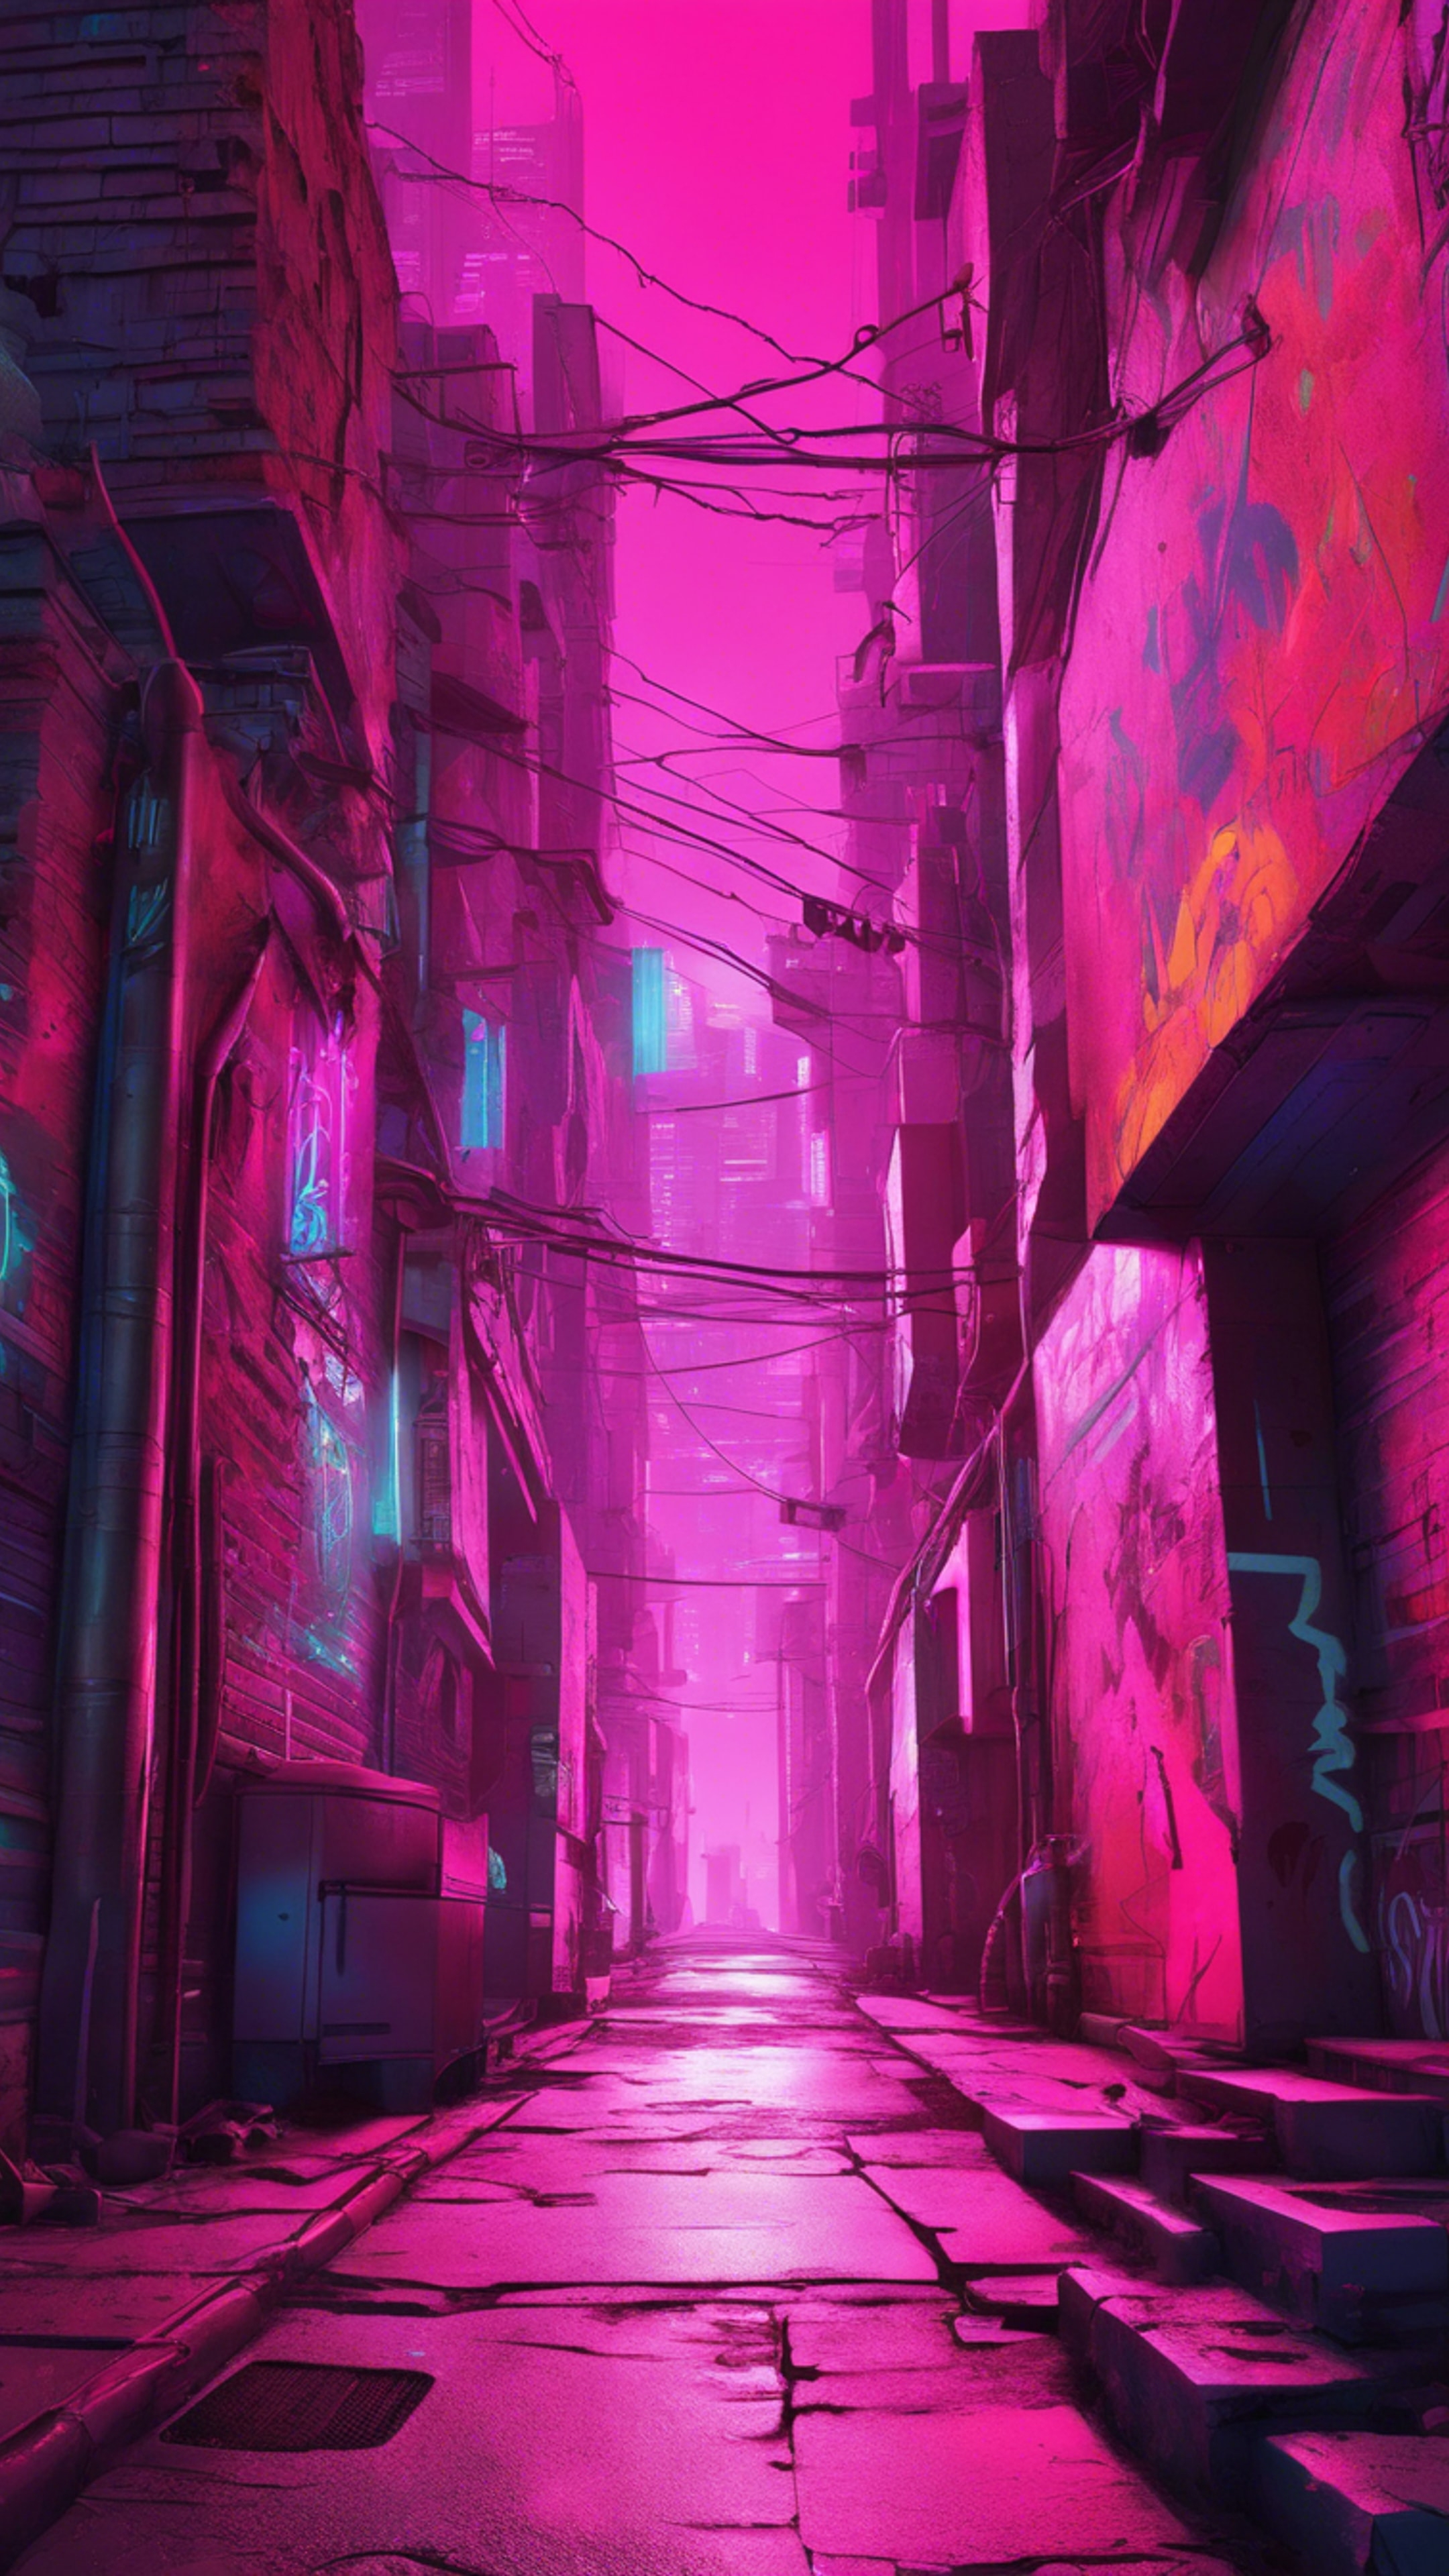 A neon-lit city alley at midnight, with bright pink graffiti on the walls, radiating a cyberpunk aura.壁紙[6a5b63b1eaec4ac98291]